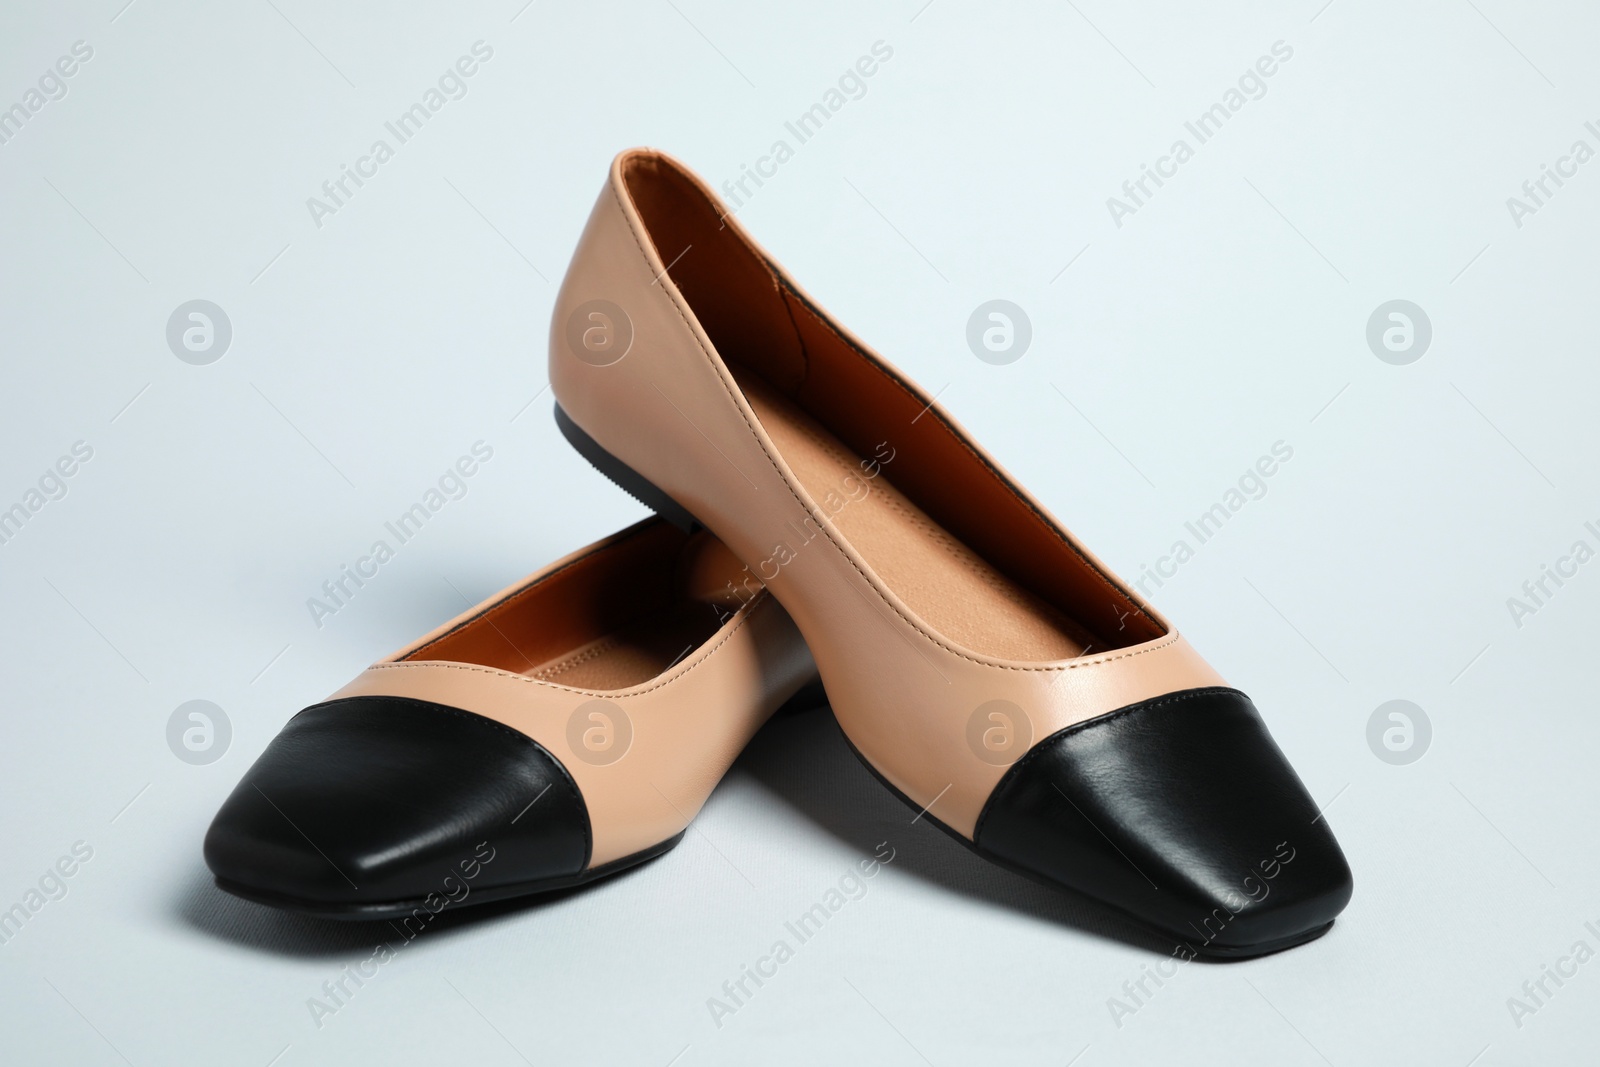 Photo of Pair of new stylish square toe ballet flats on light grey background